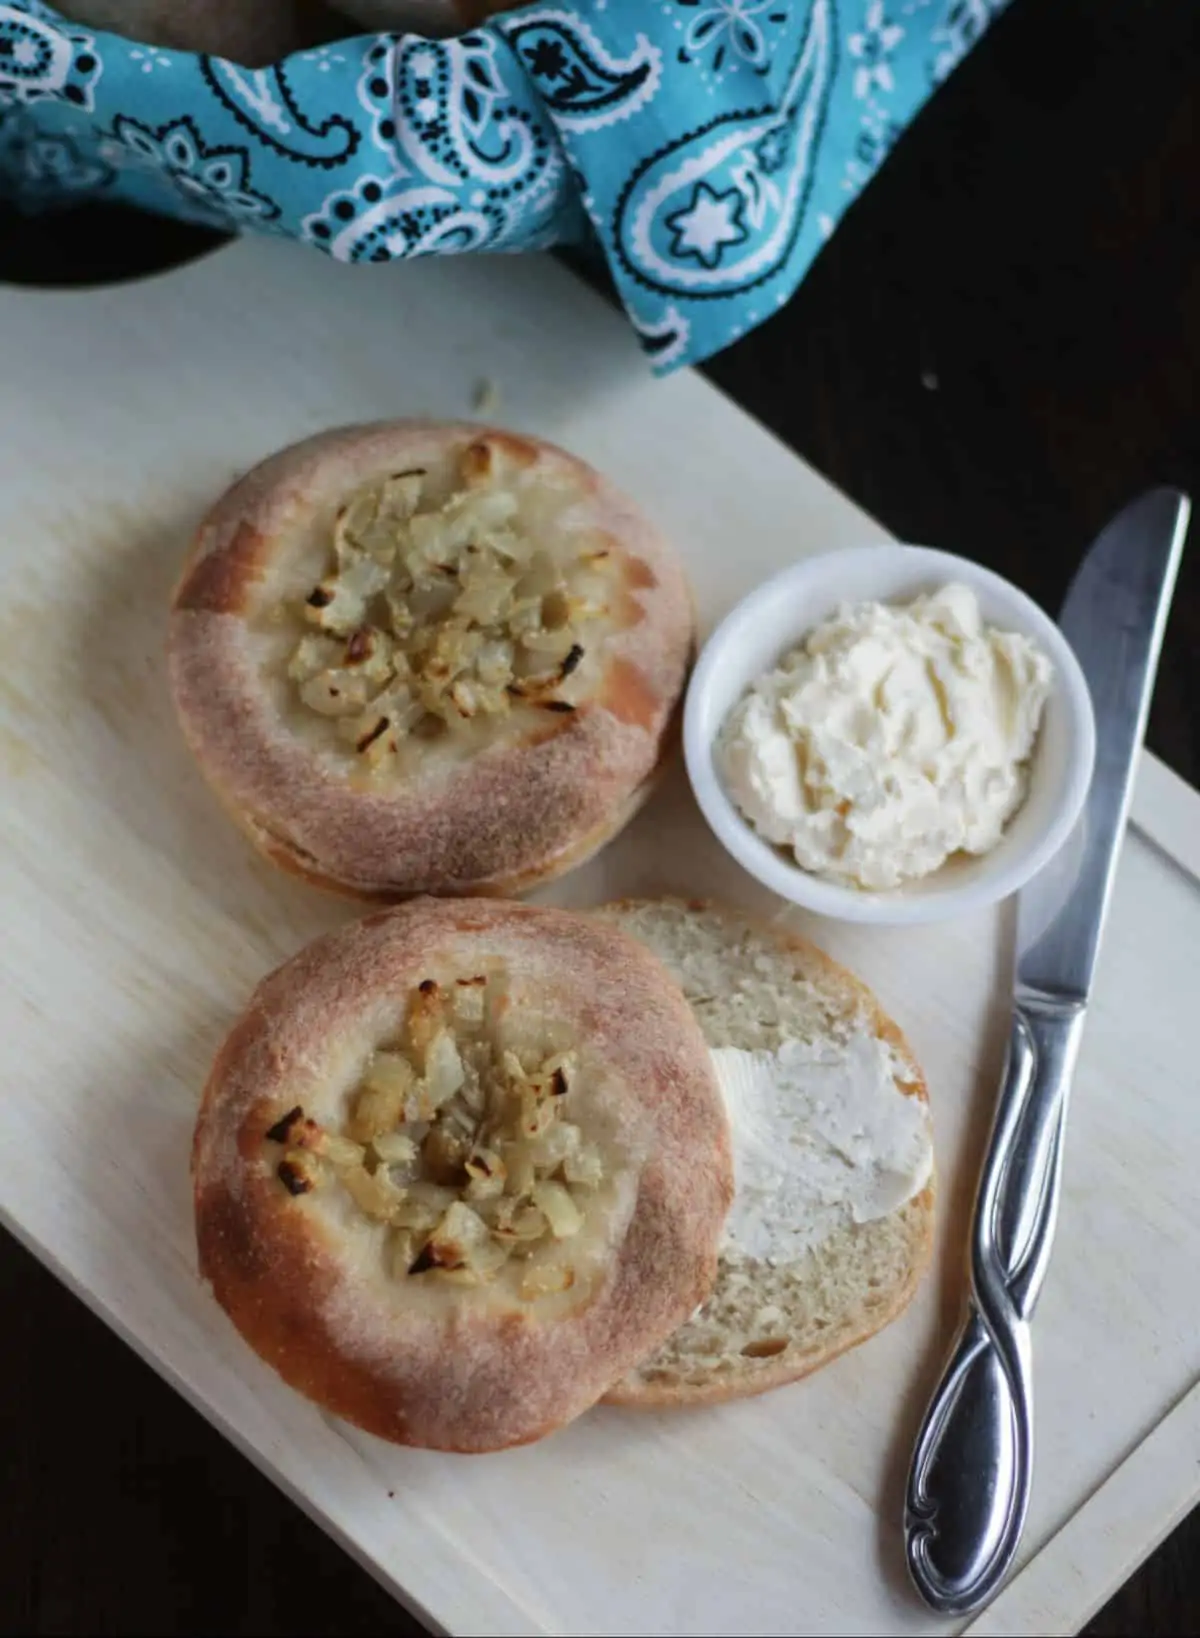 Bialy in wooden platter sliced and smeared with butter.